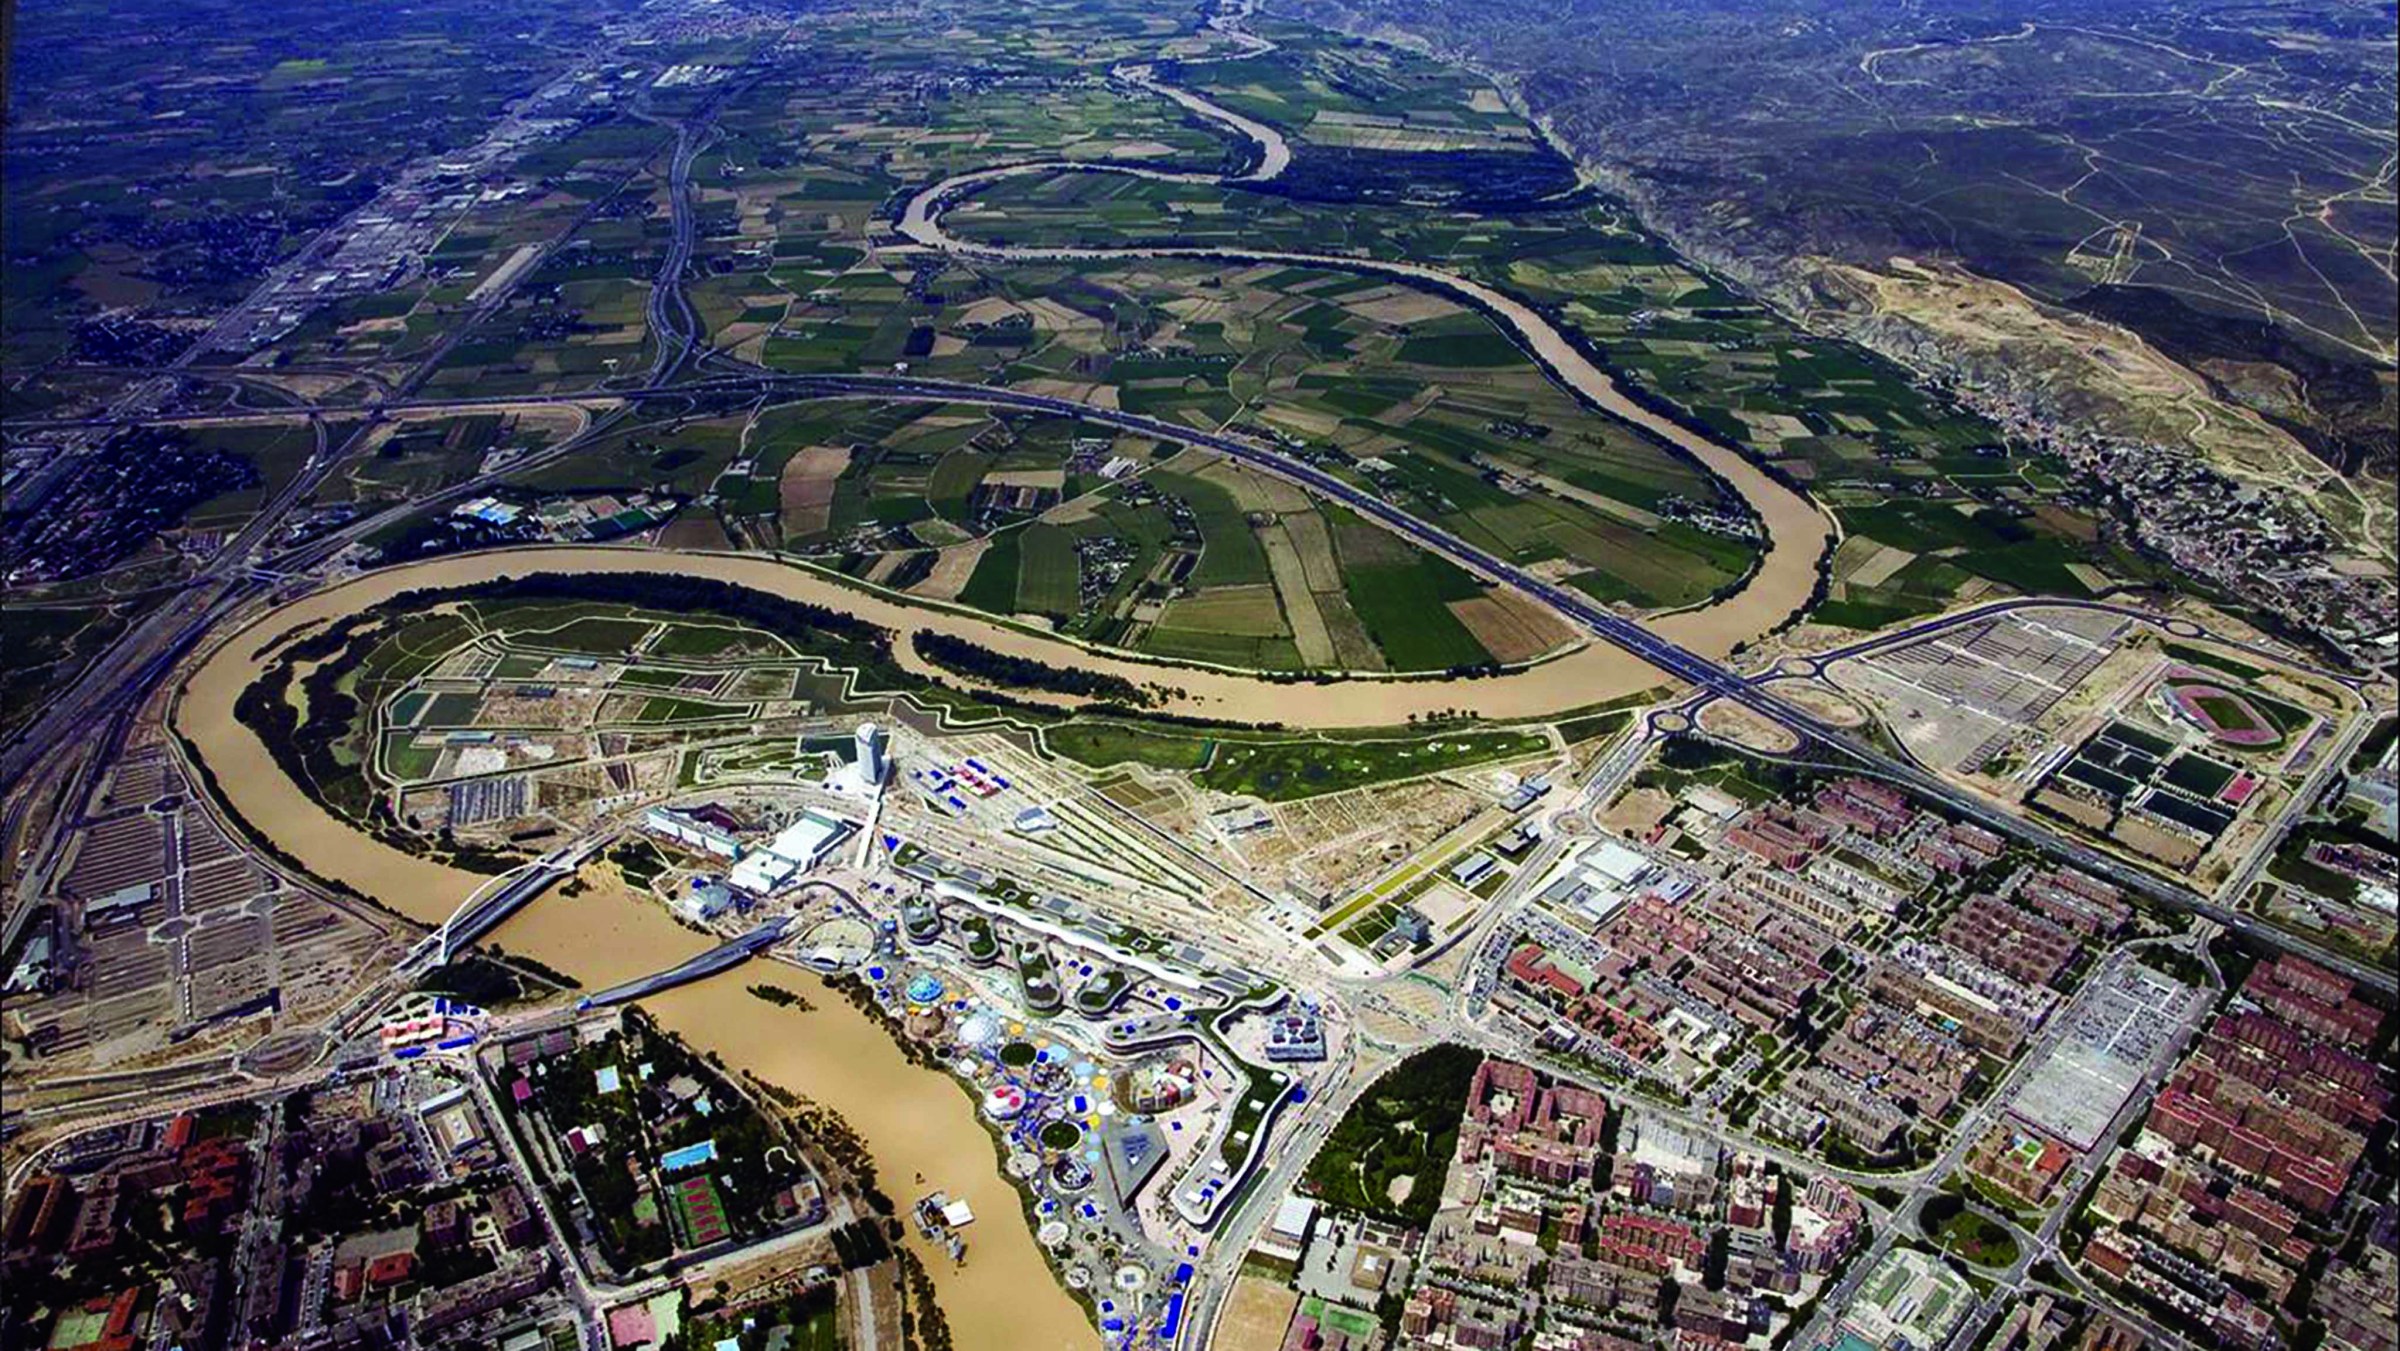 Aerial photo of a winding river through undeveloped and urbanized areas in Zaragoza, Spain.